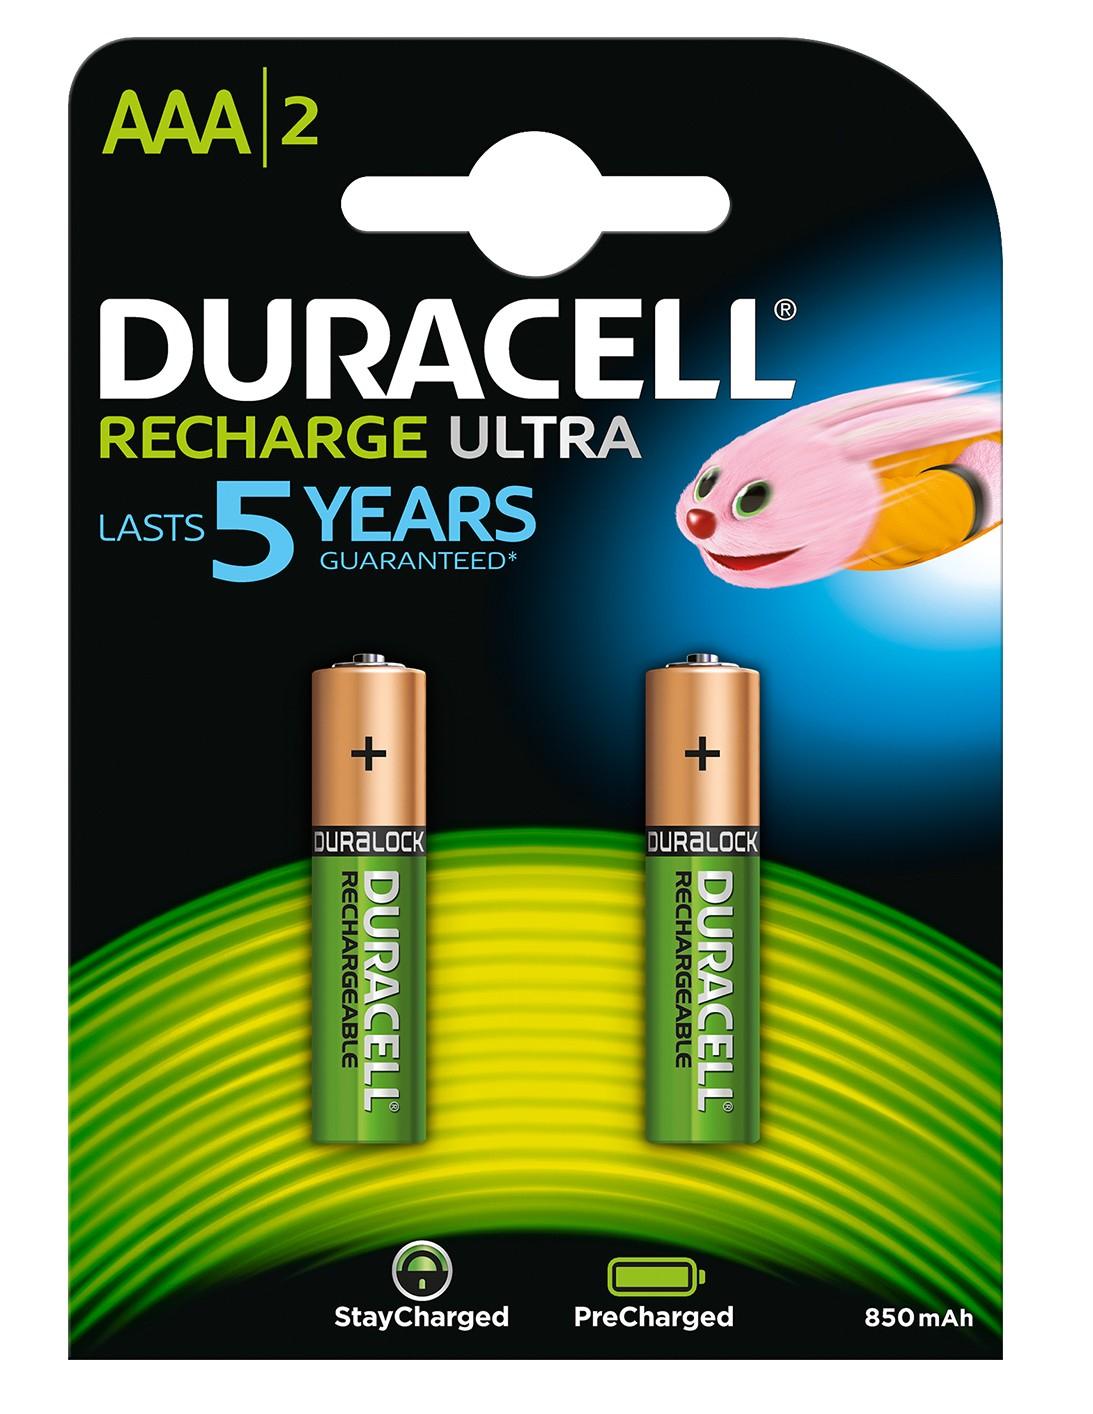 Duracell Recharge Ultra AAA